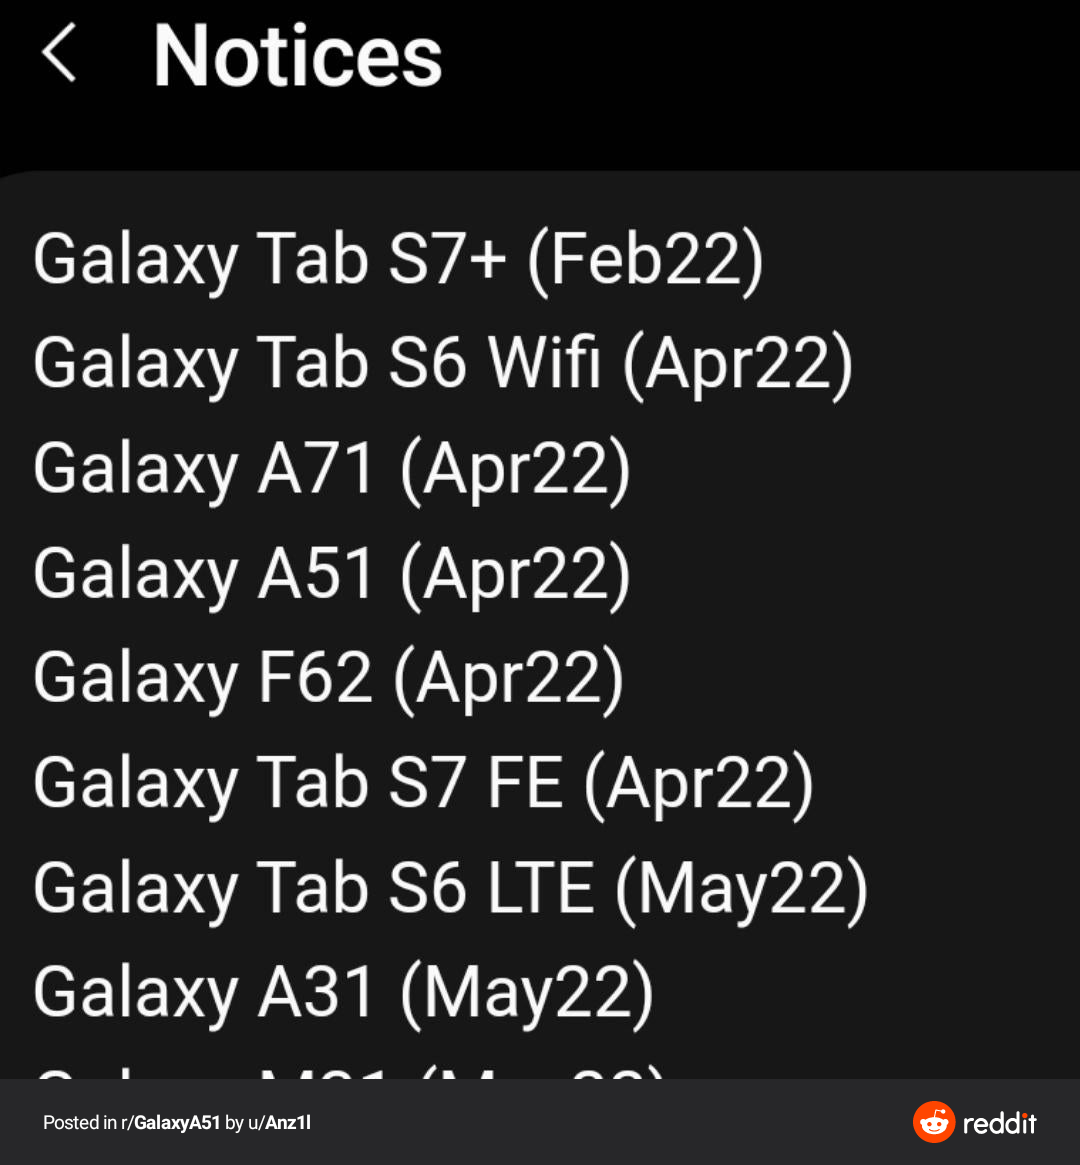 Galaxy A51 OneUI 4.1 Android 12-based update